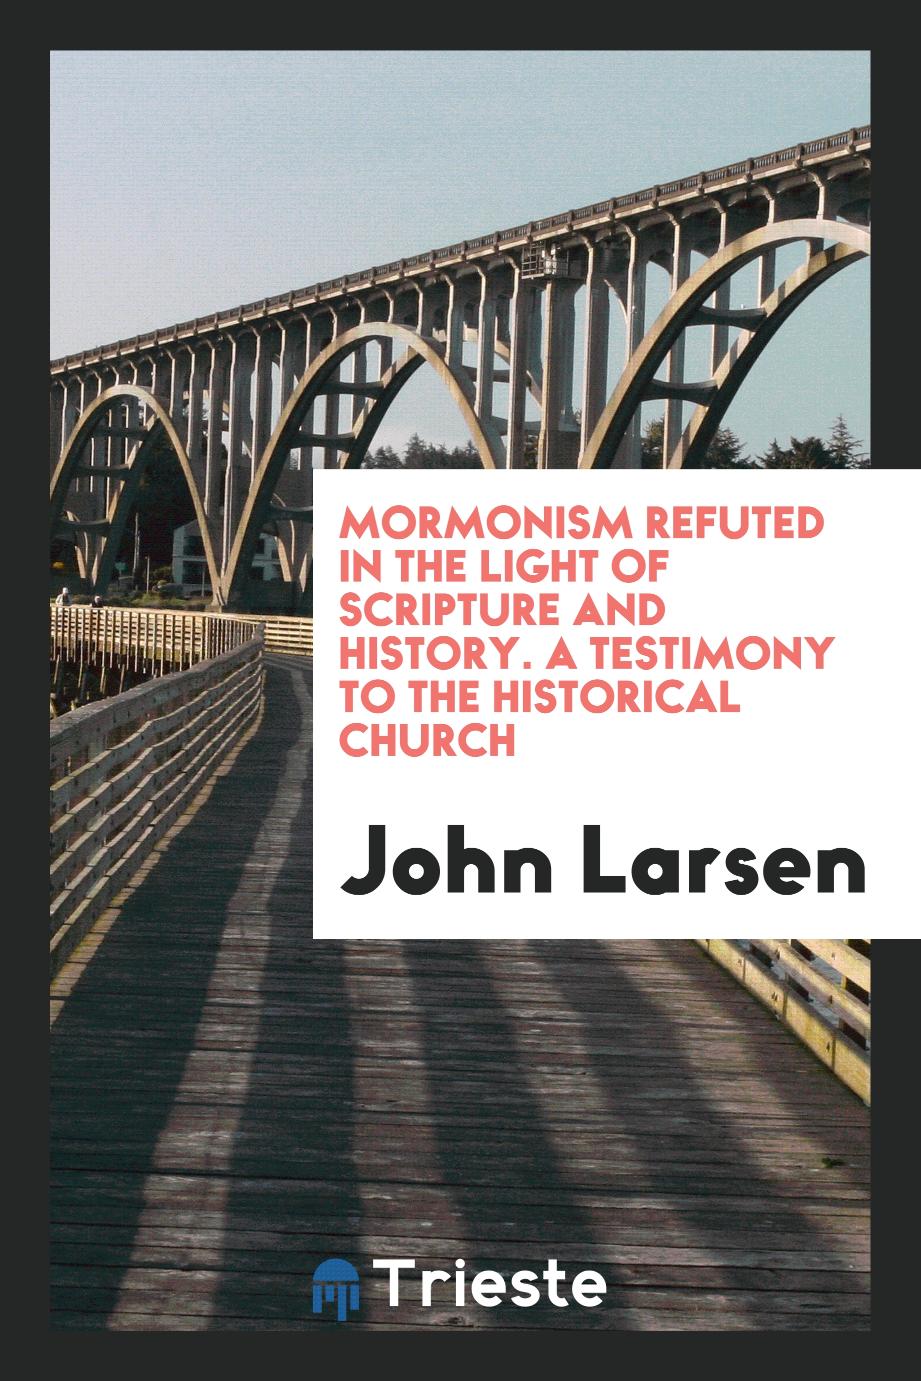 Mormonism Refuted in the Light of Scripture and History. A Testimony to the Historical Church